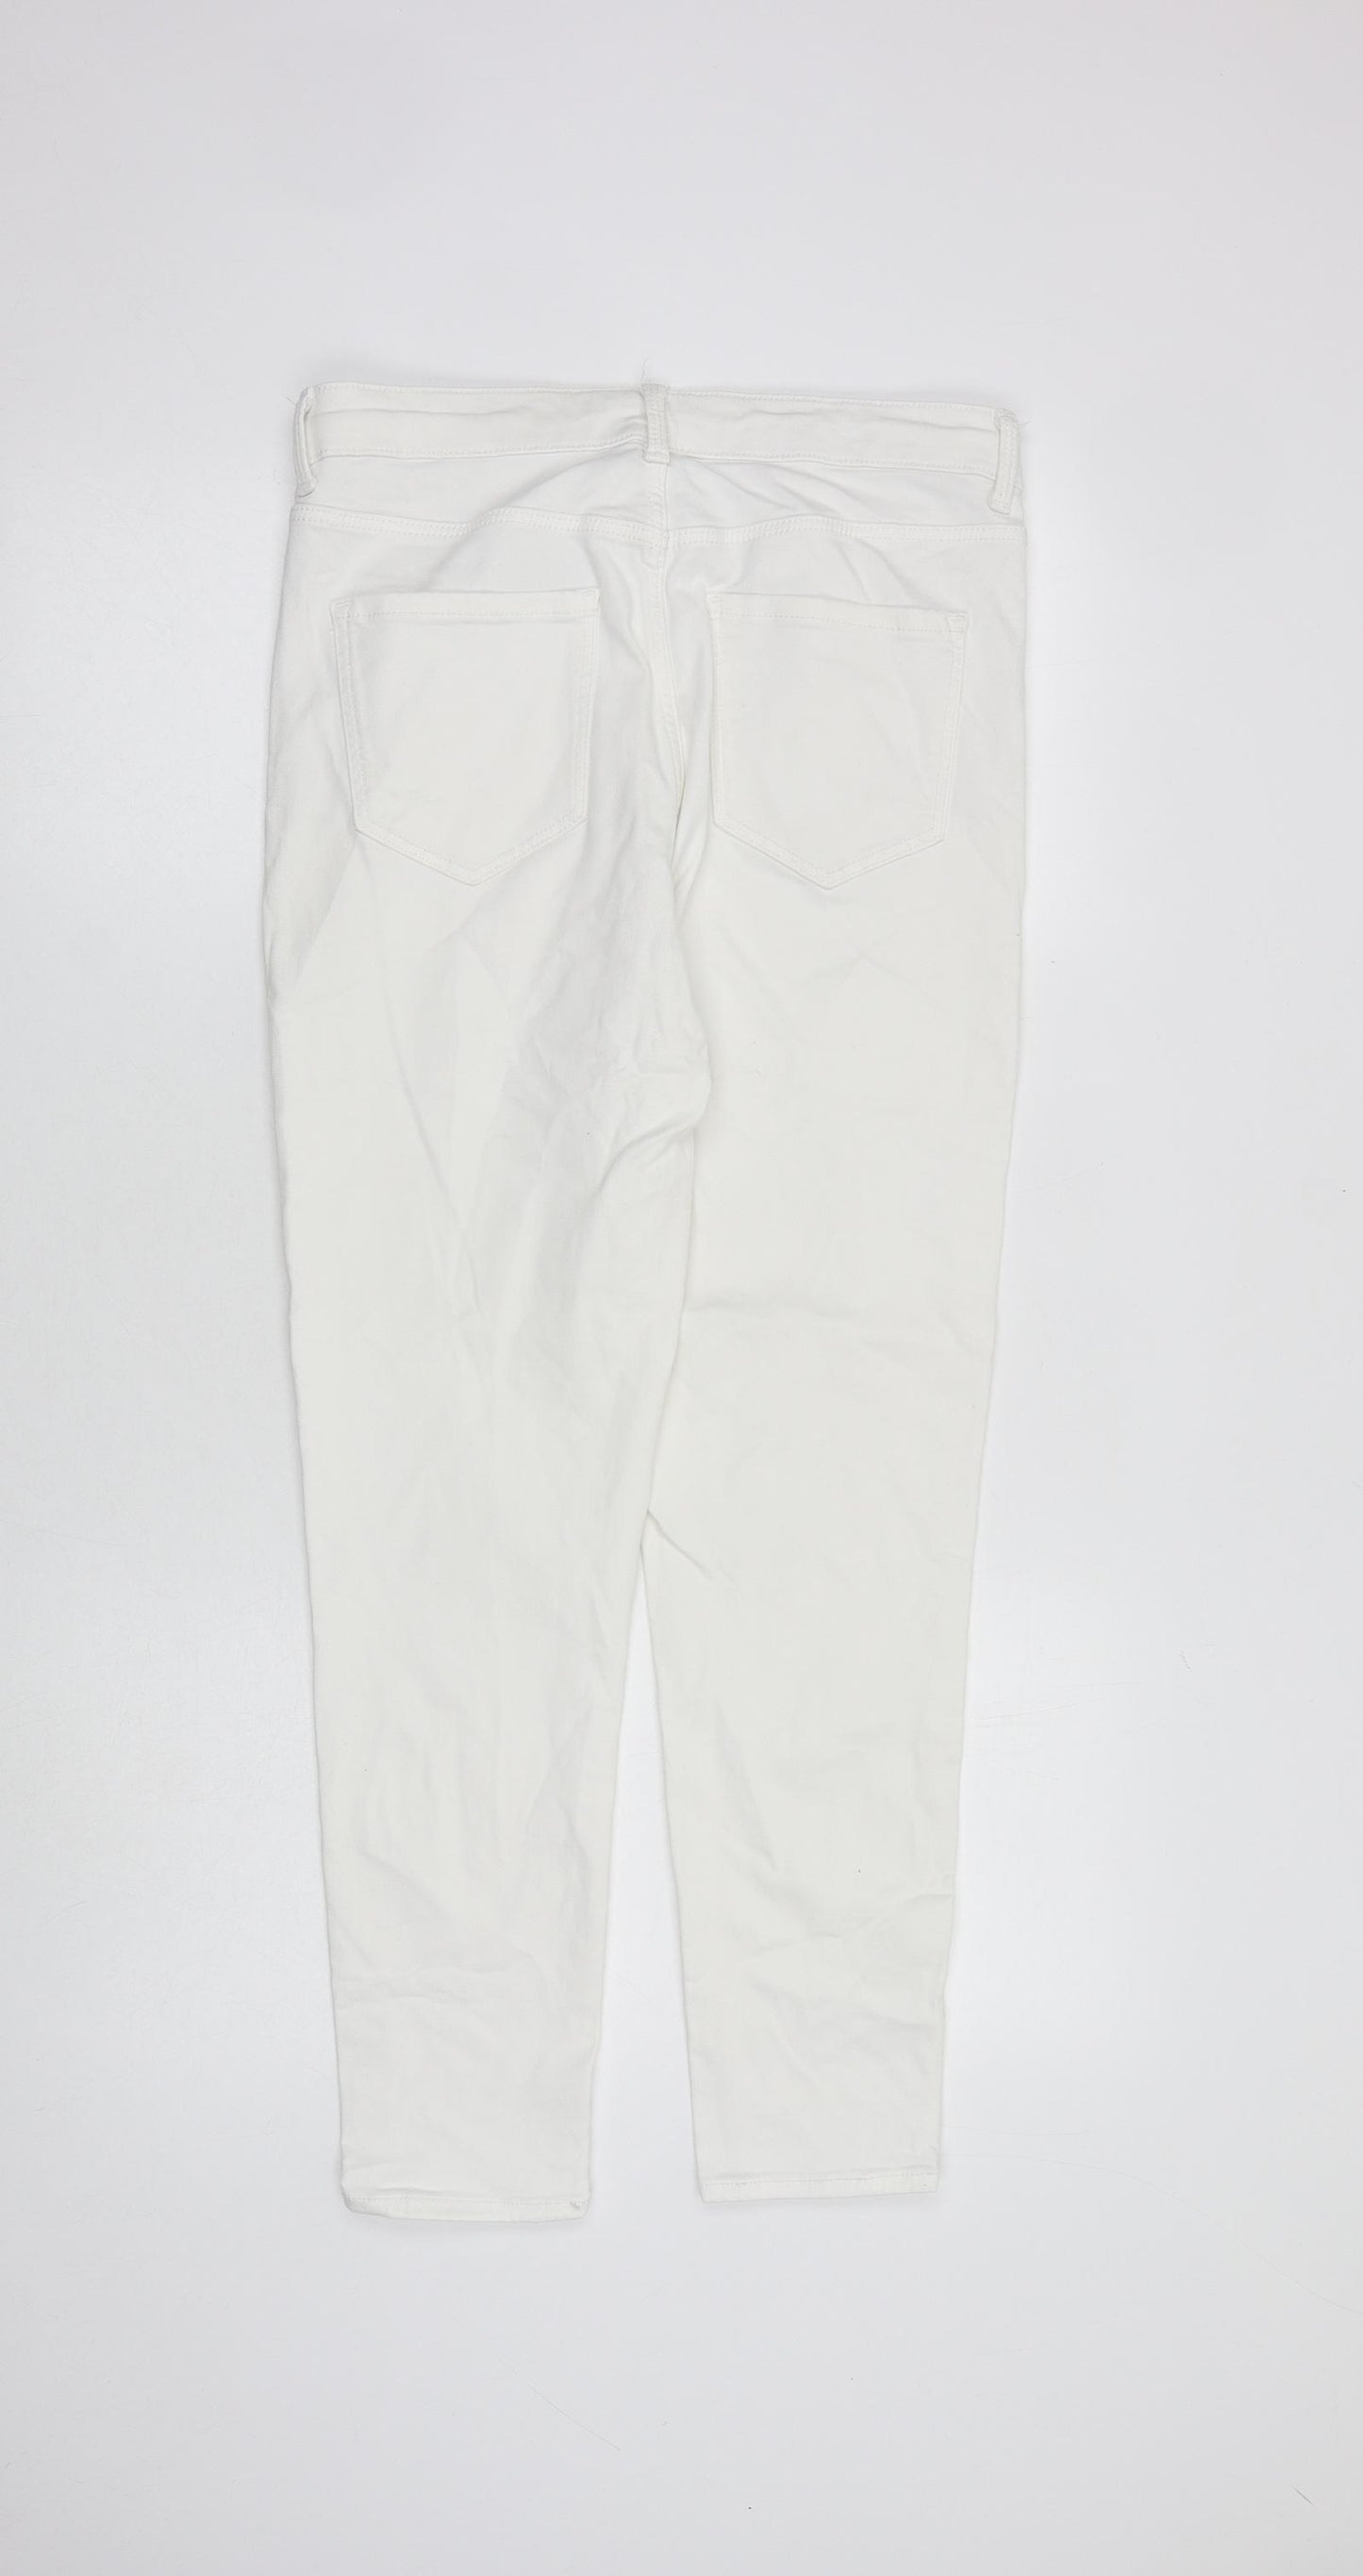 Marks and Spencer Womens White Cotton Skinny Jeans Size 12 L27 in Slim Zip